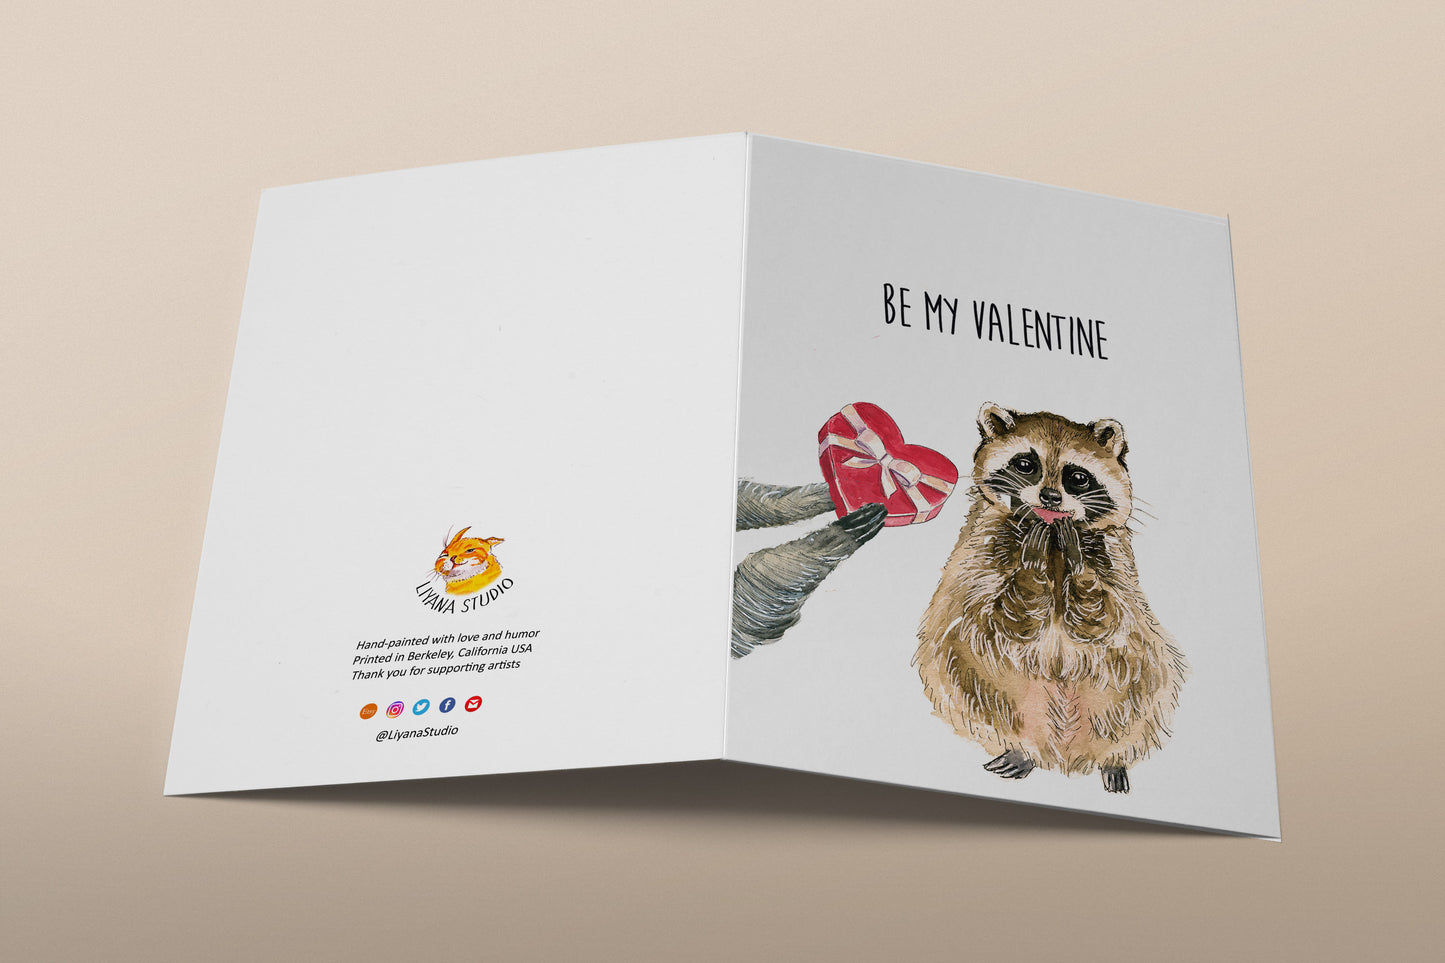 Funny Raccoon Valentines Card For Girlfriend - Be My Valentines Chocolate Candy Gift For Her